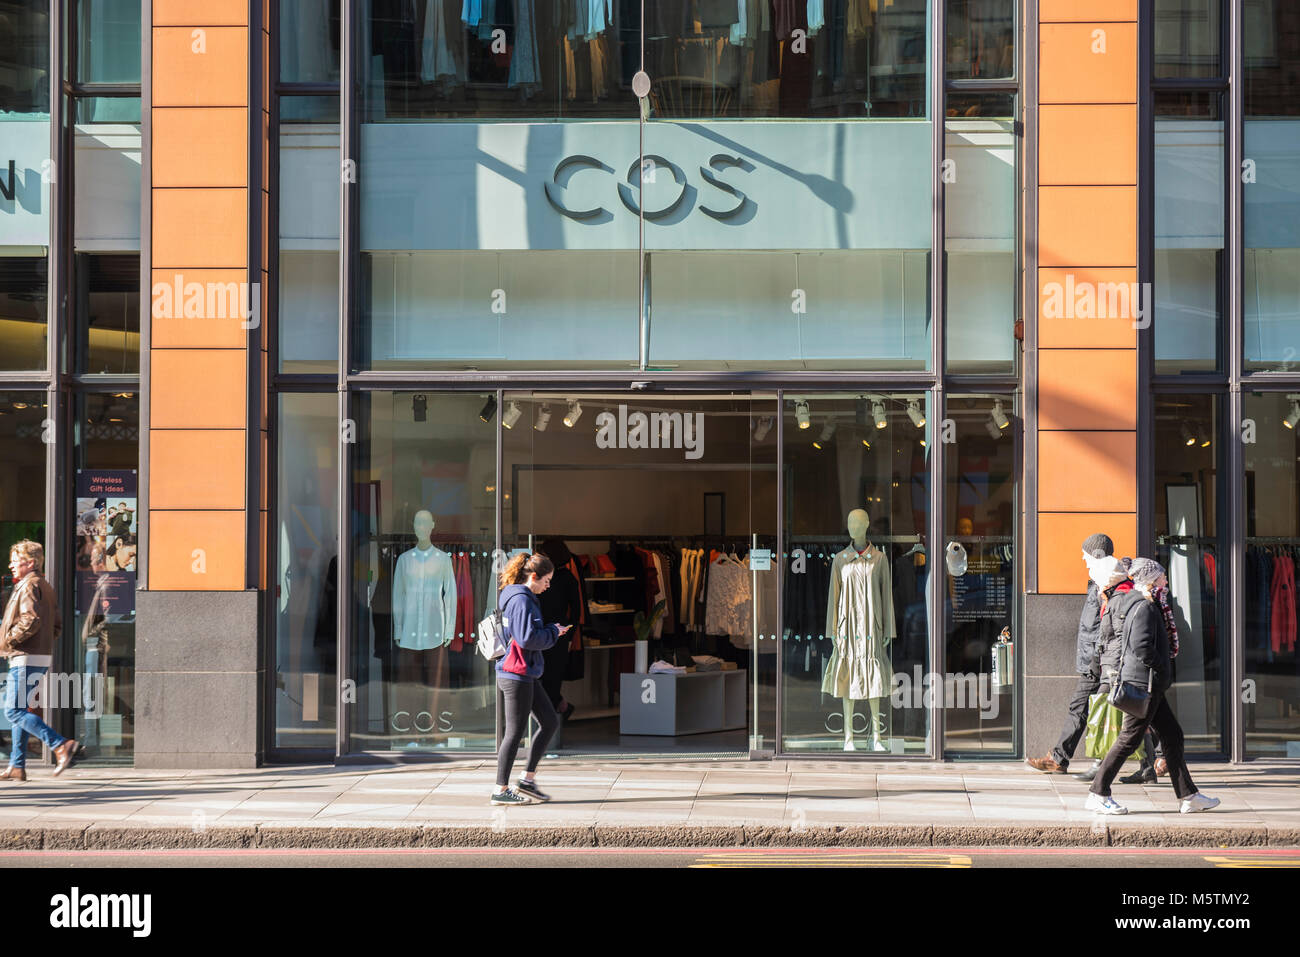 COS clothing shop store front in Brompton Road, Knightsbridge, London, UK.  Shoppers Stock Photo - Alamy